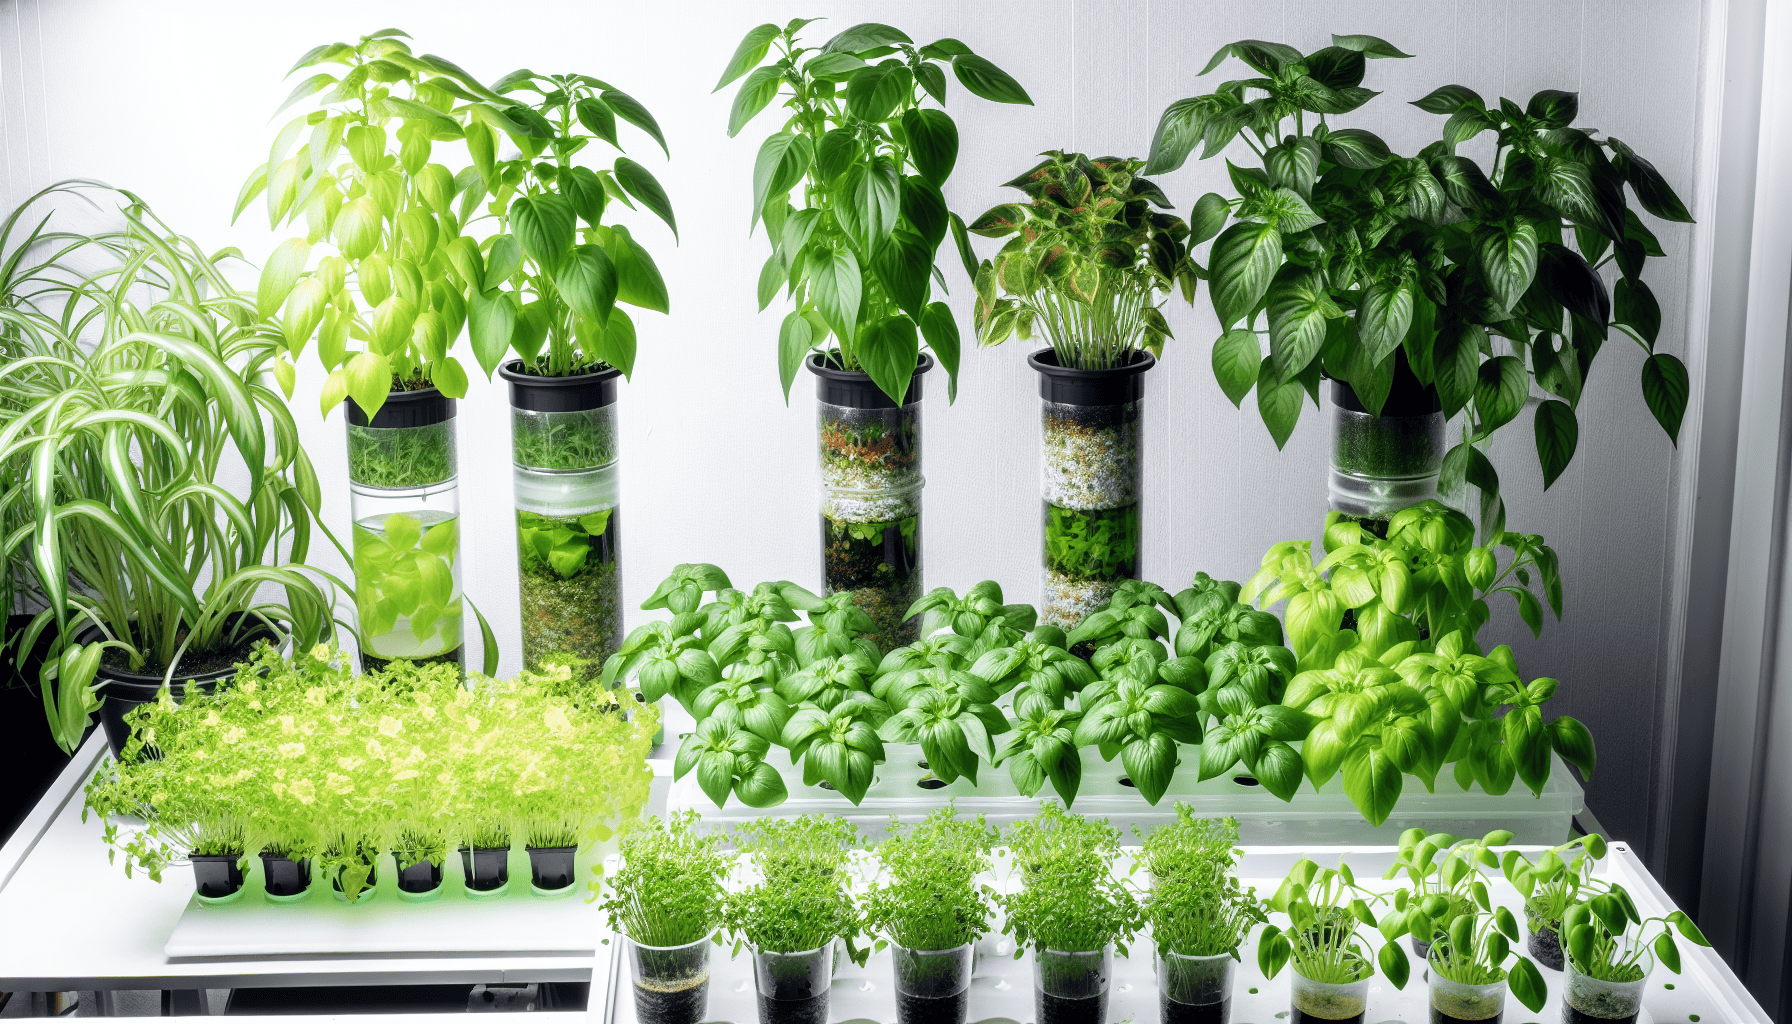 Hydroponic houseplants in a soilless environment